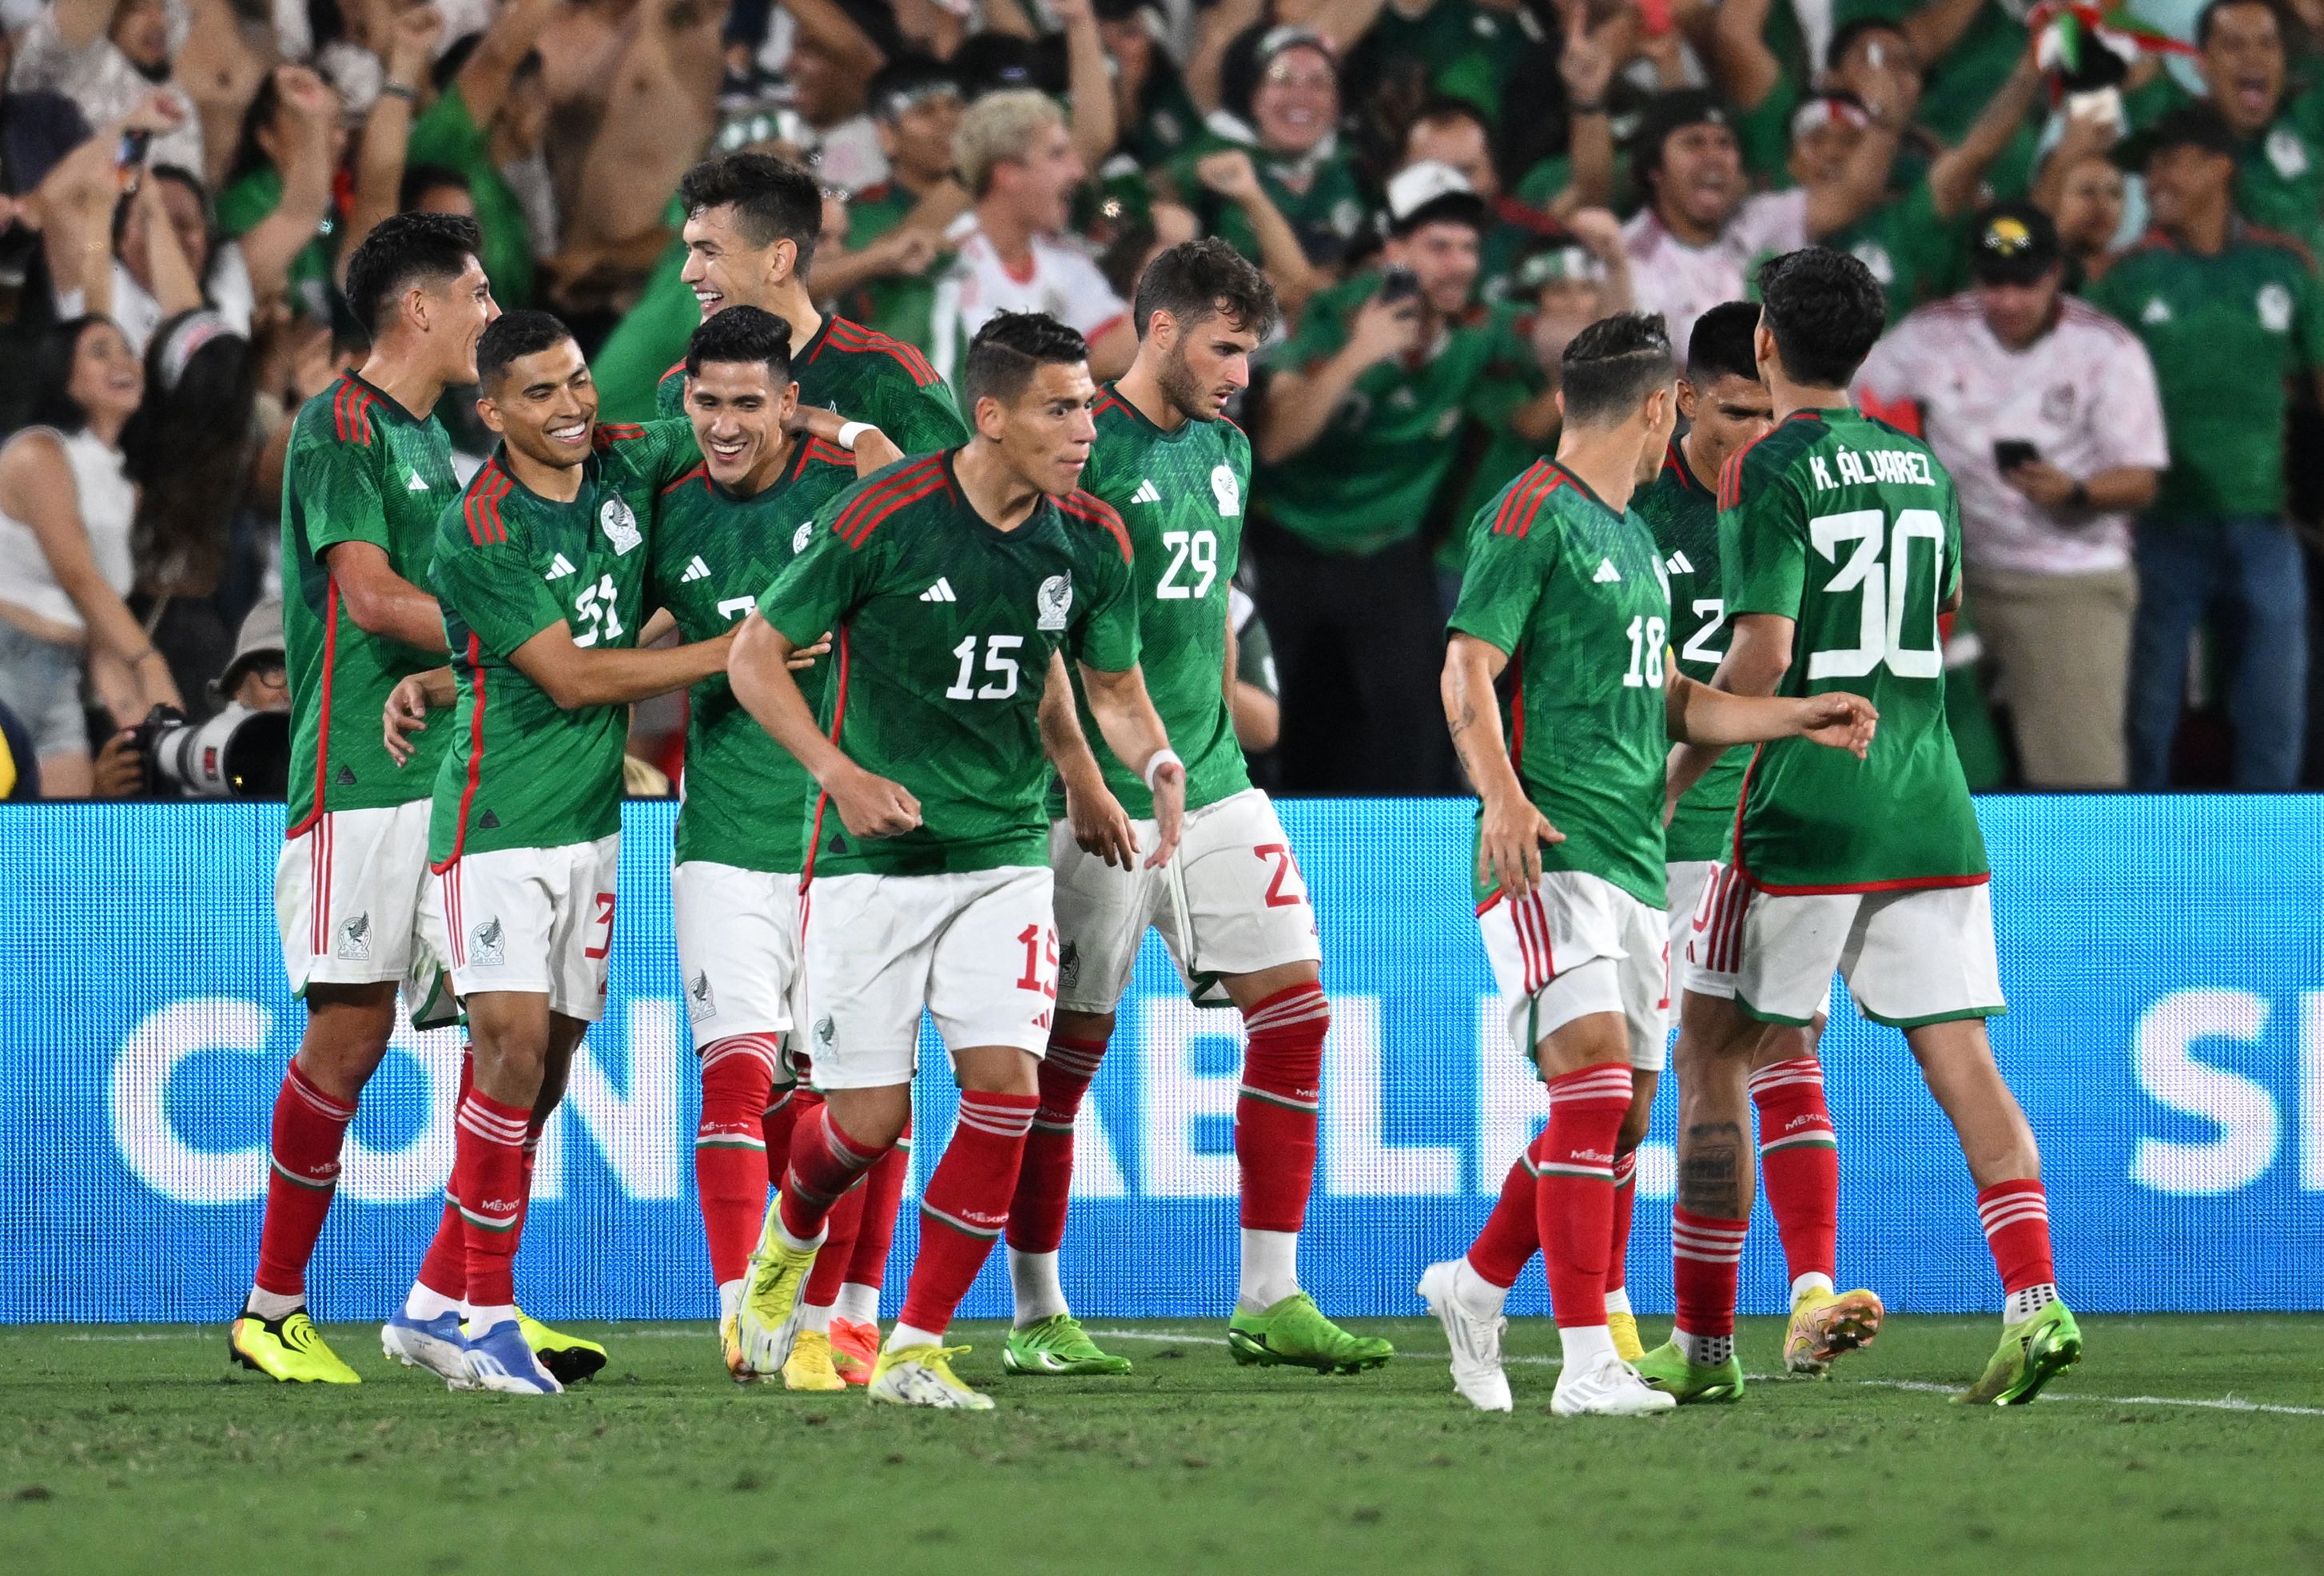 Mexico will try to secure that elusive quarter-final spot